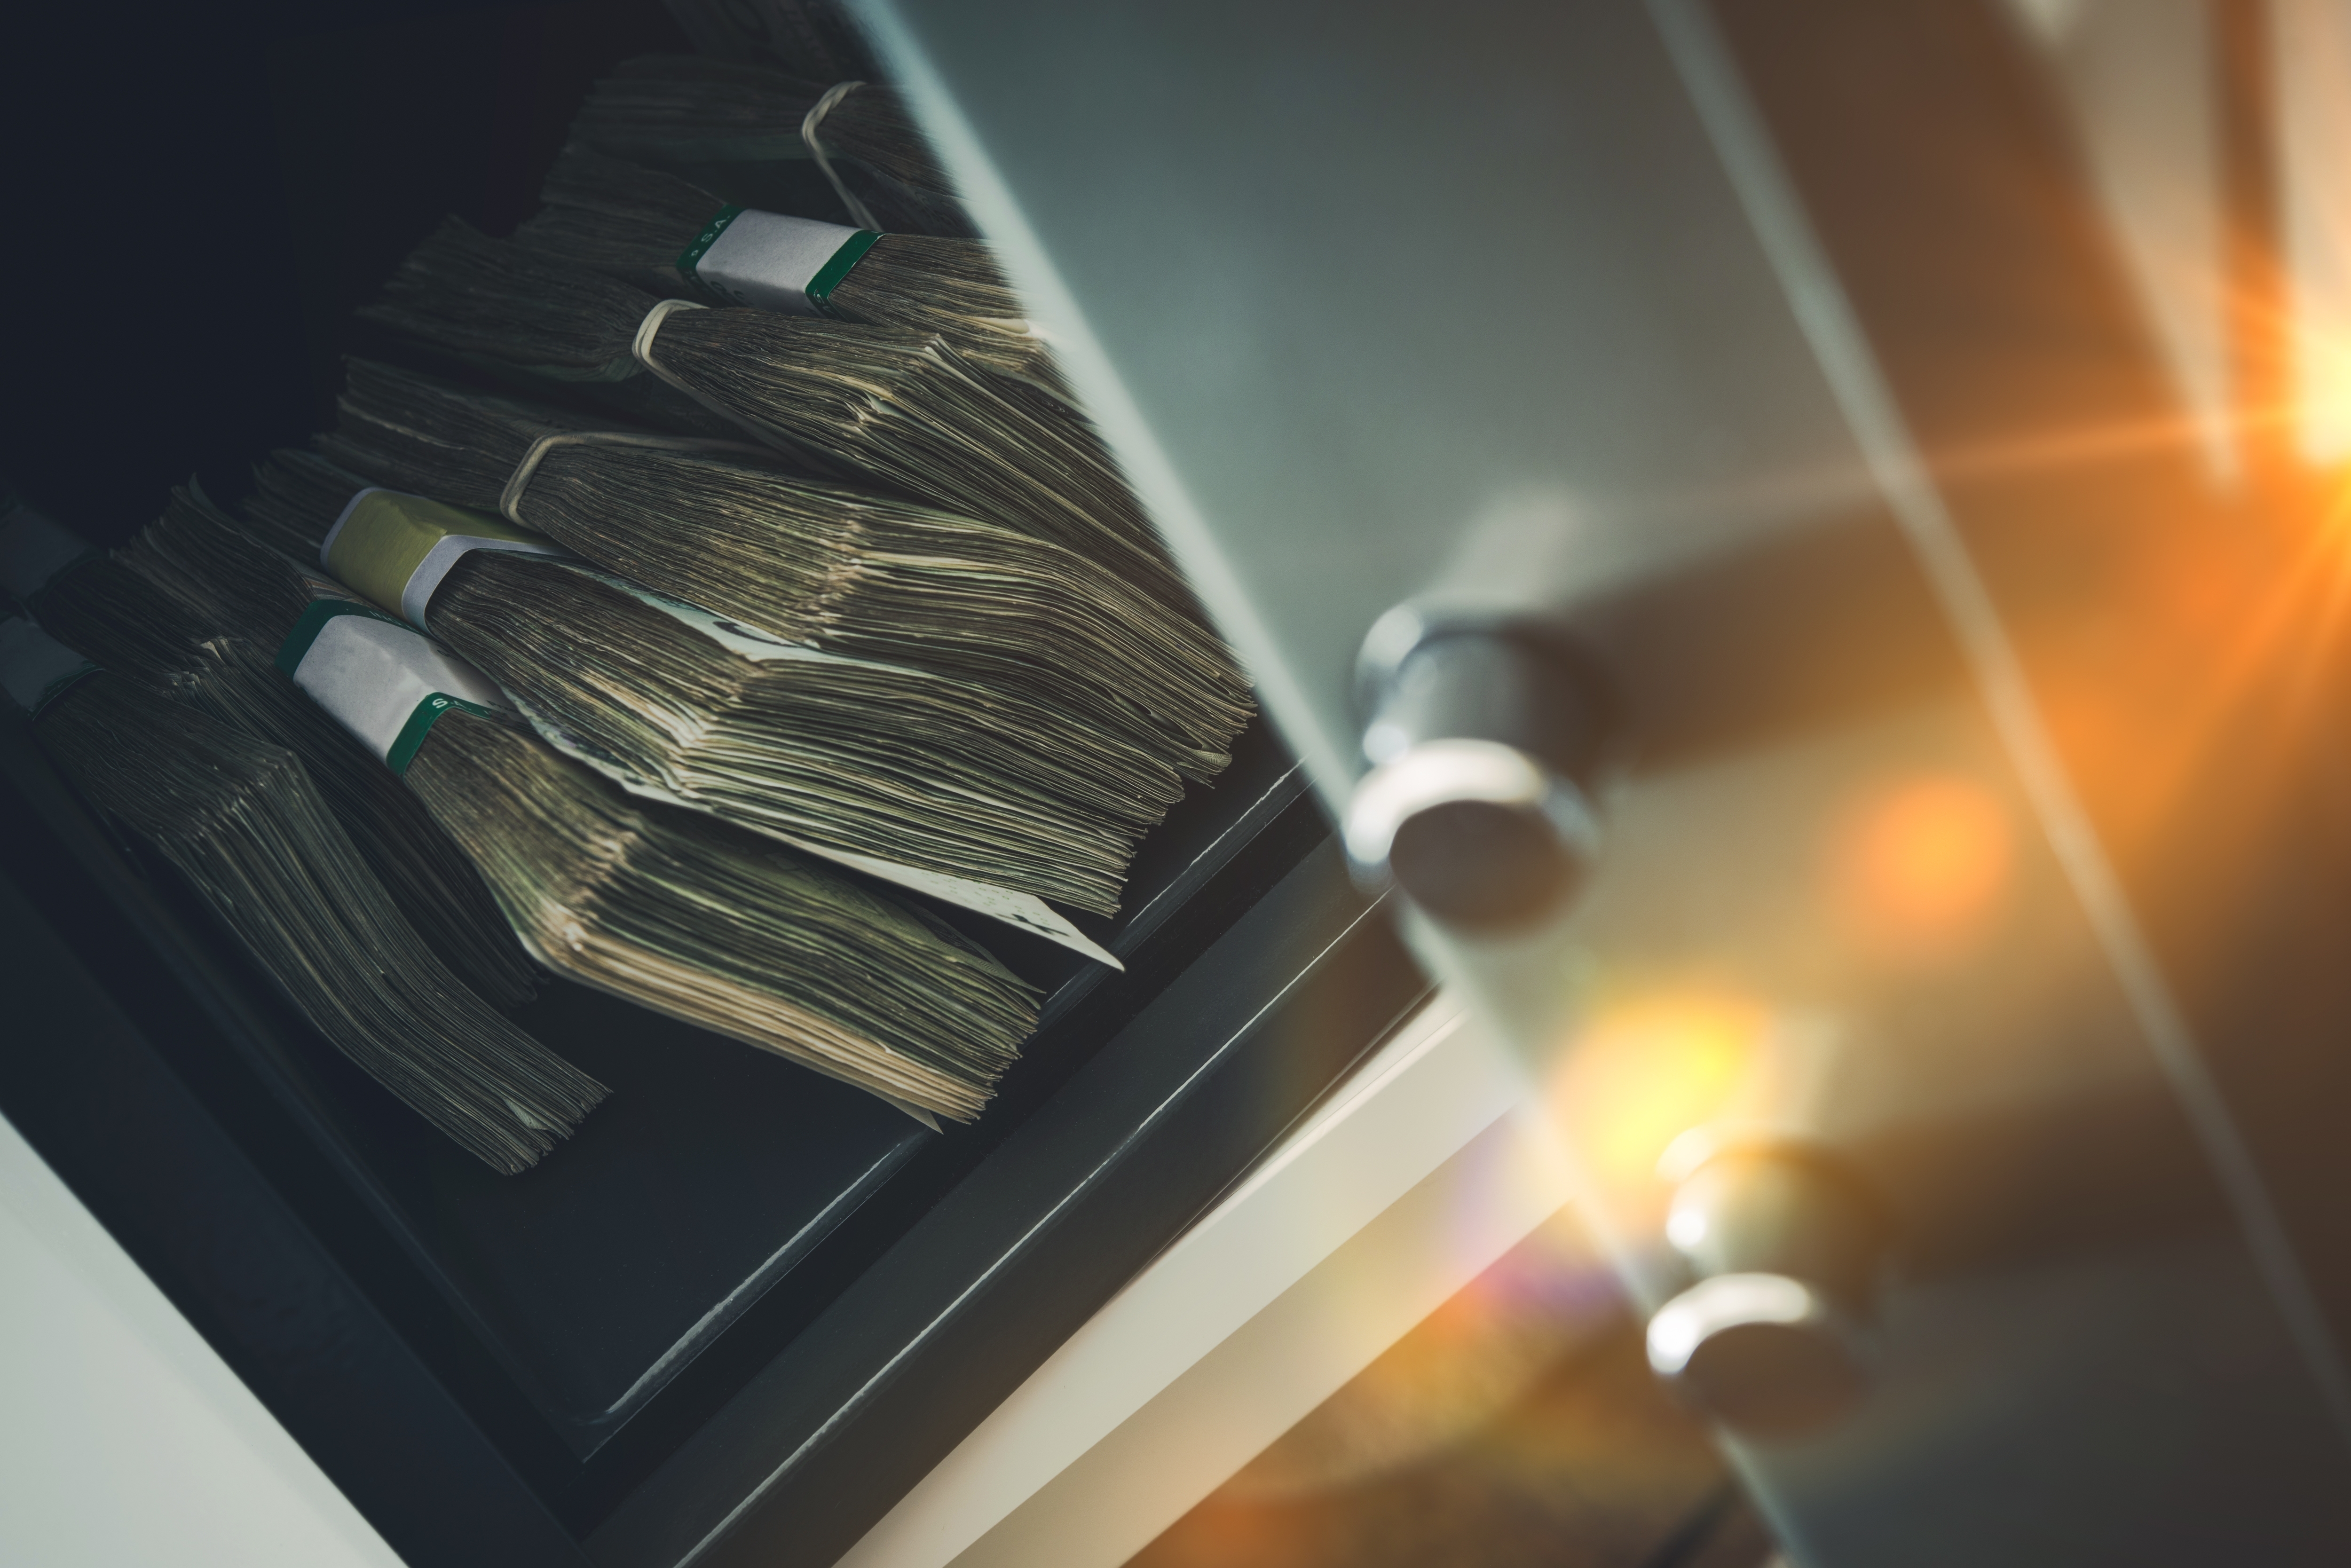 Small Residential Vault with Pile of Cash Money. | Source: Shutterstock